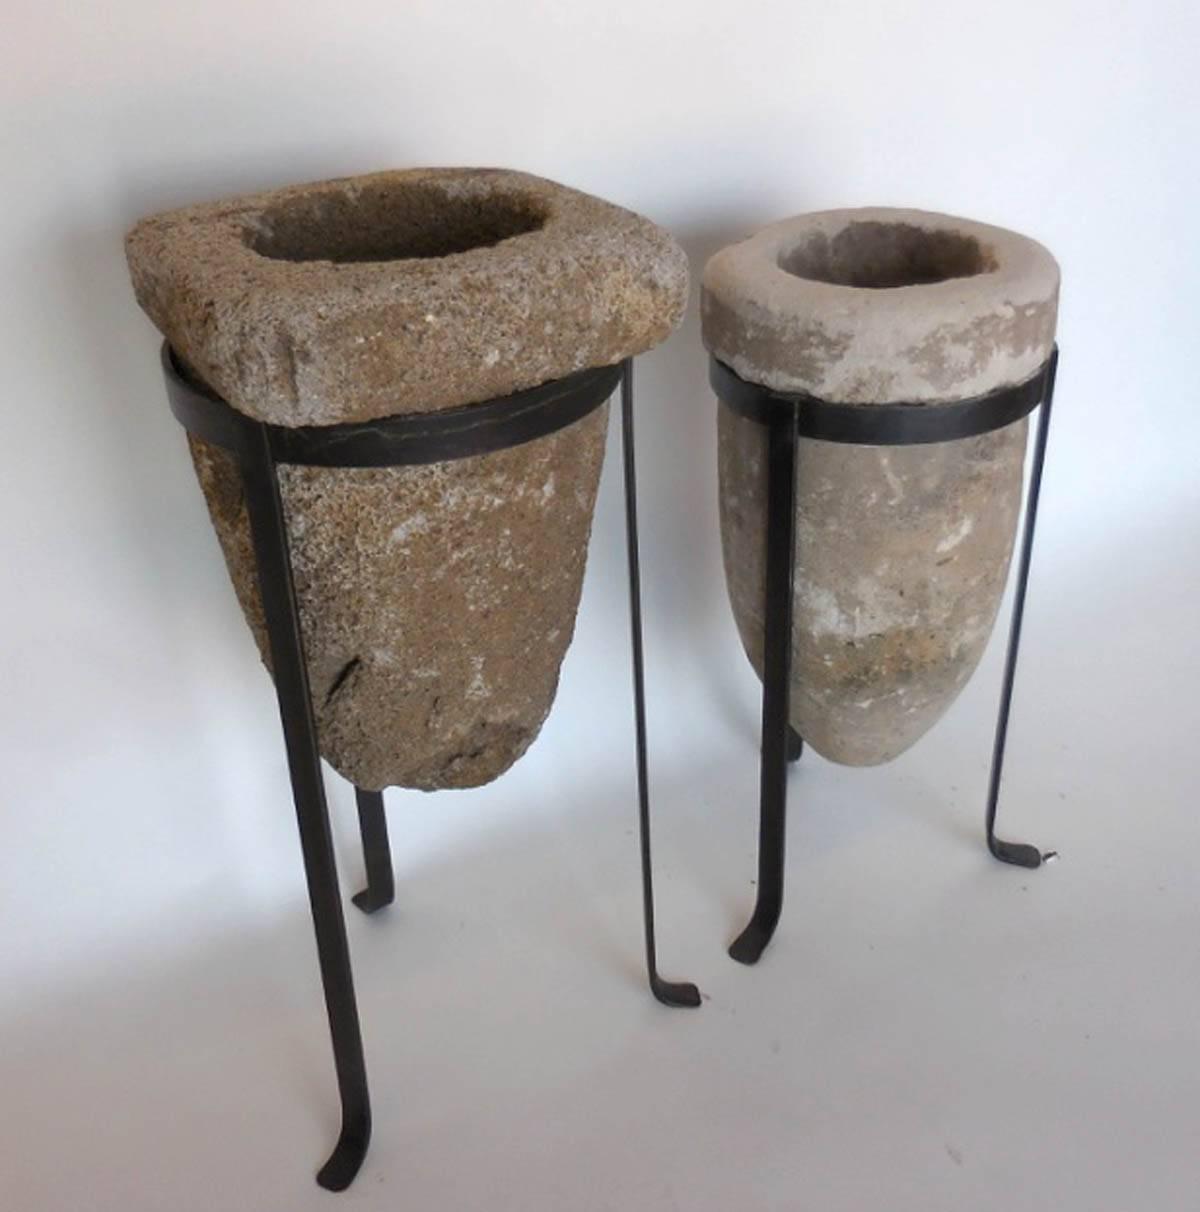 Antique stone water filter - only left, taller one available. Looks great with or without a plant! Old worn patina.
Left measures: 14 x 14 x 28 H
